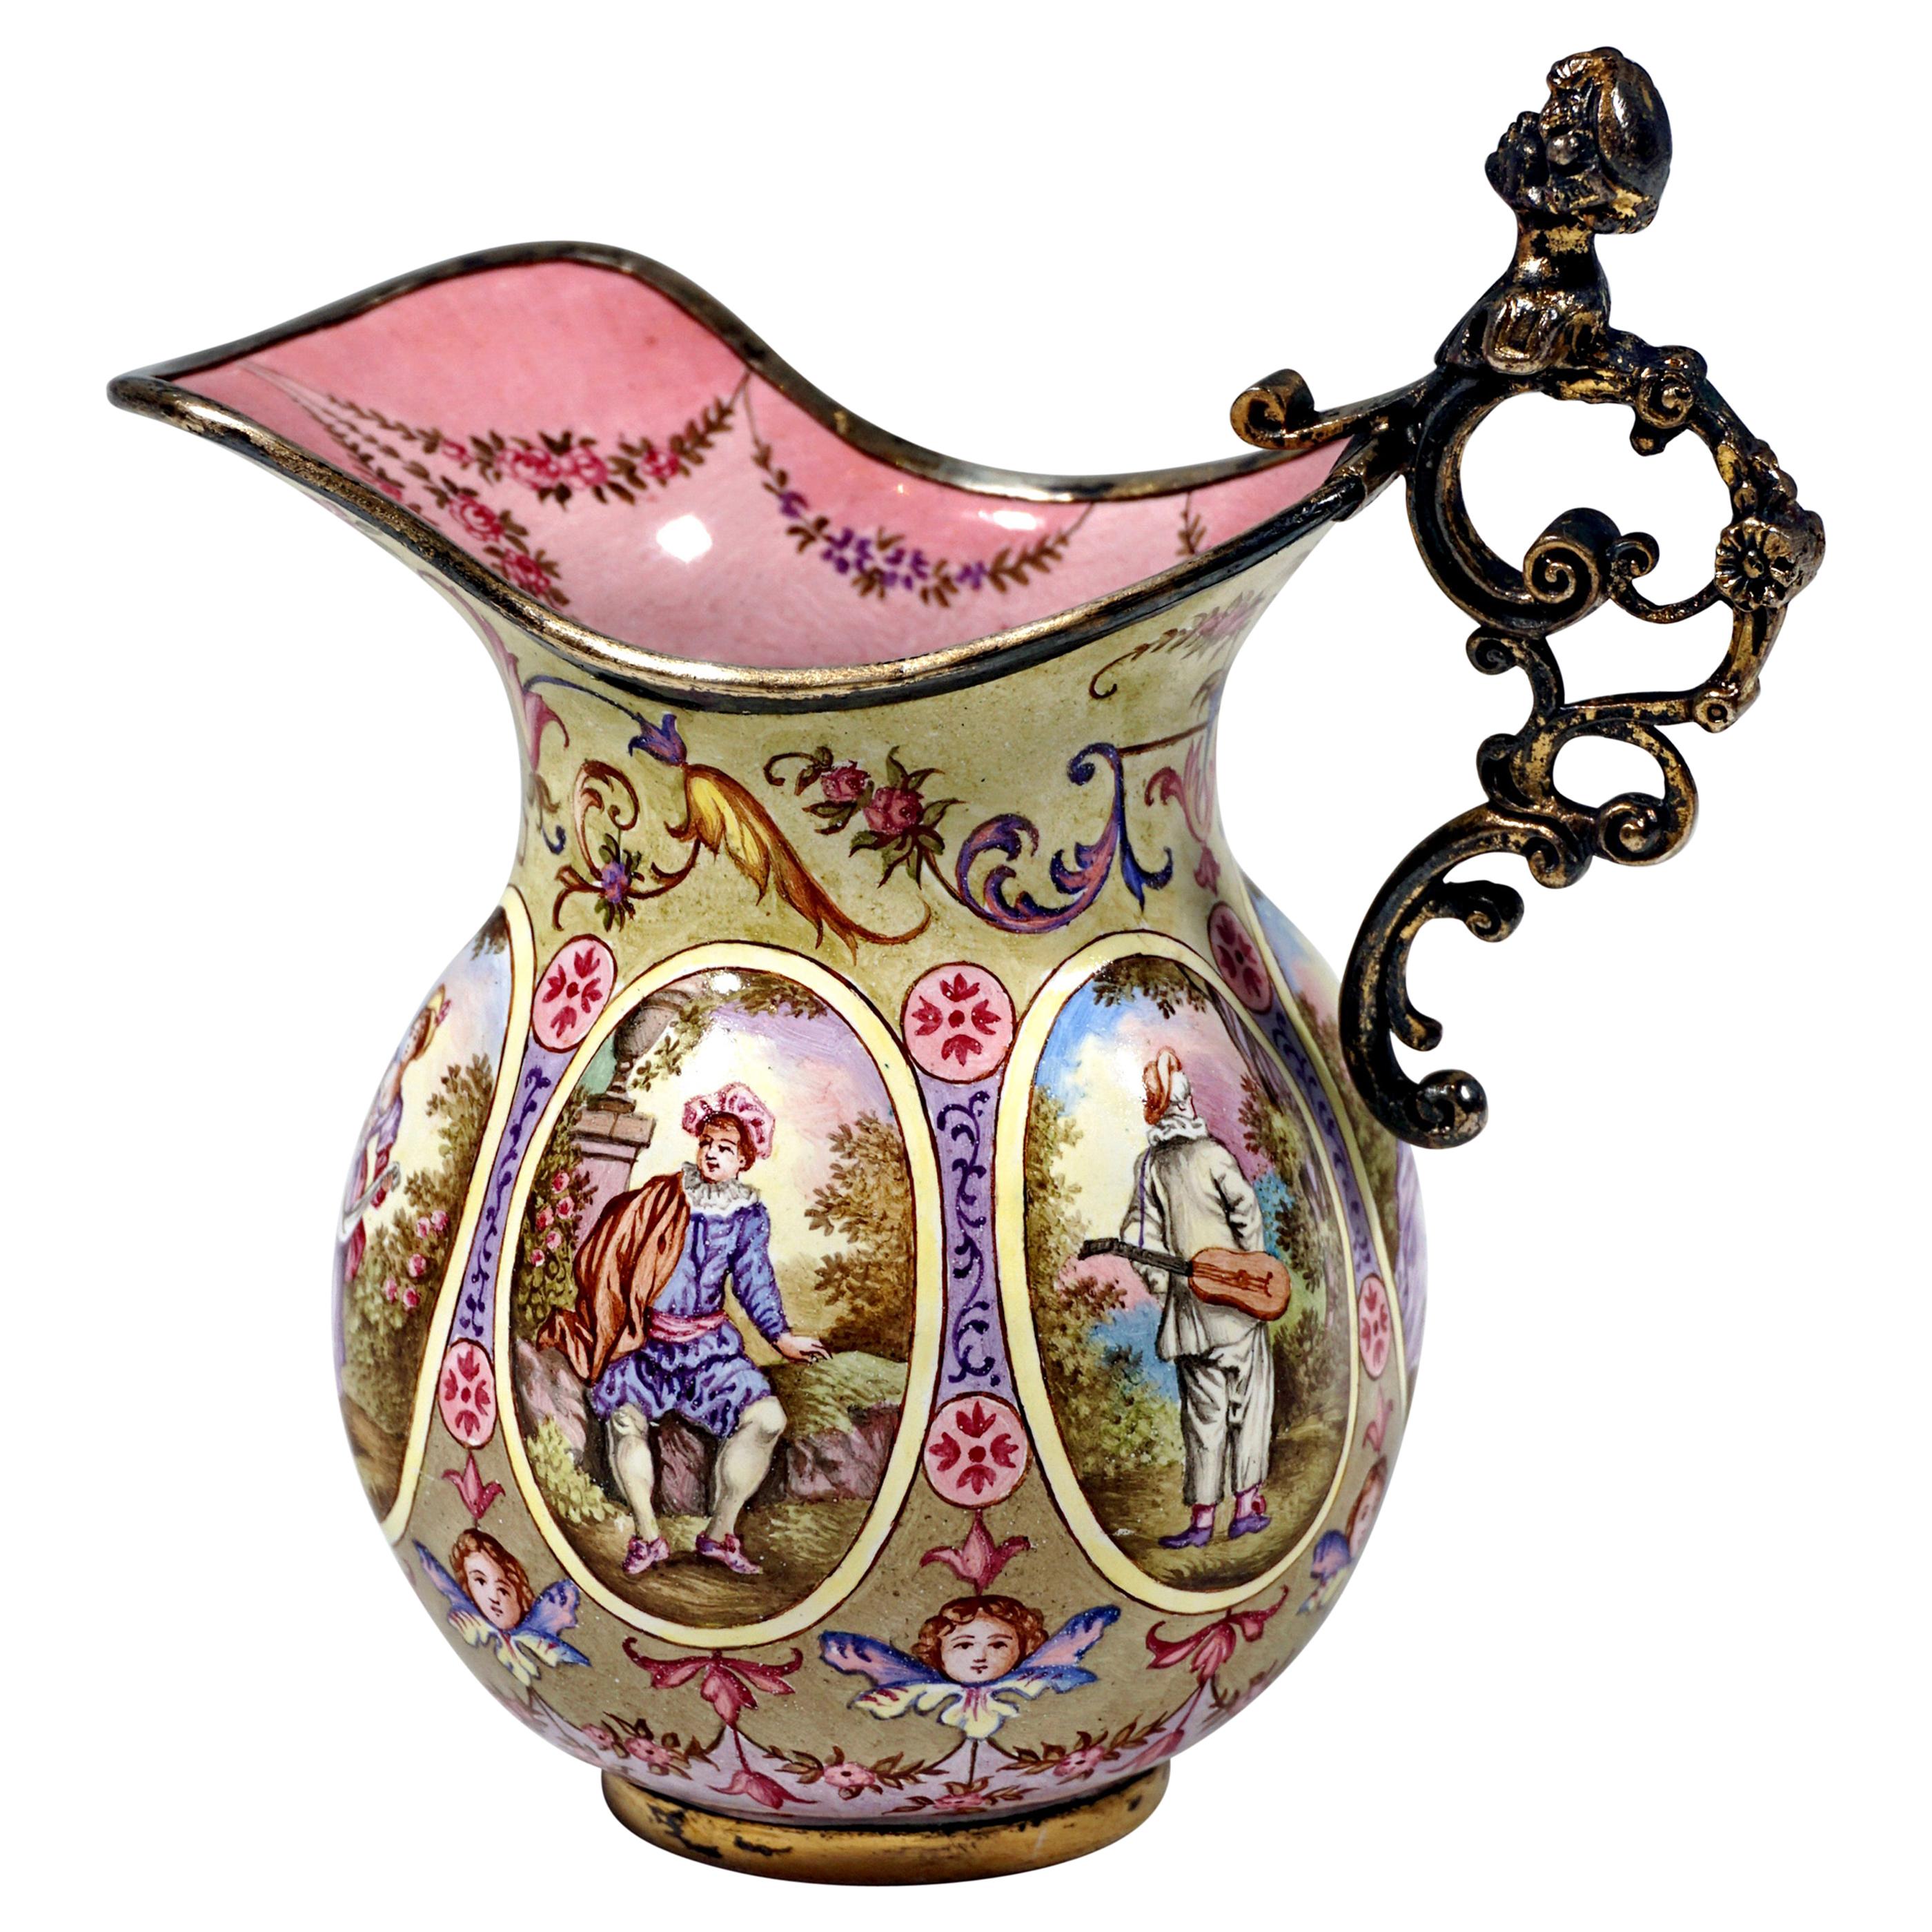 19th Century Small Viennese Enamel Jug with Watteau and Arabesque Painting